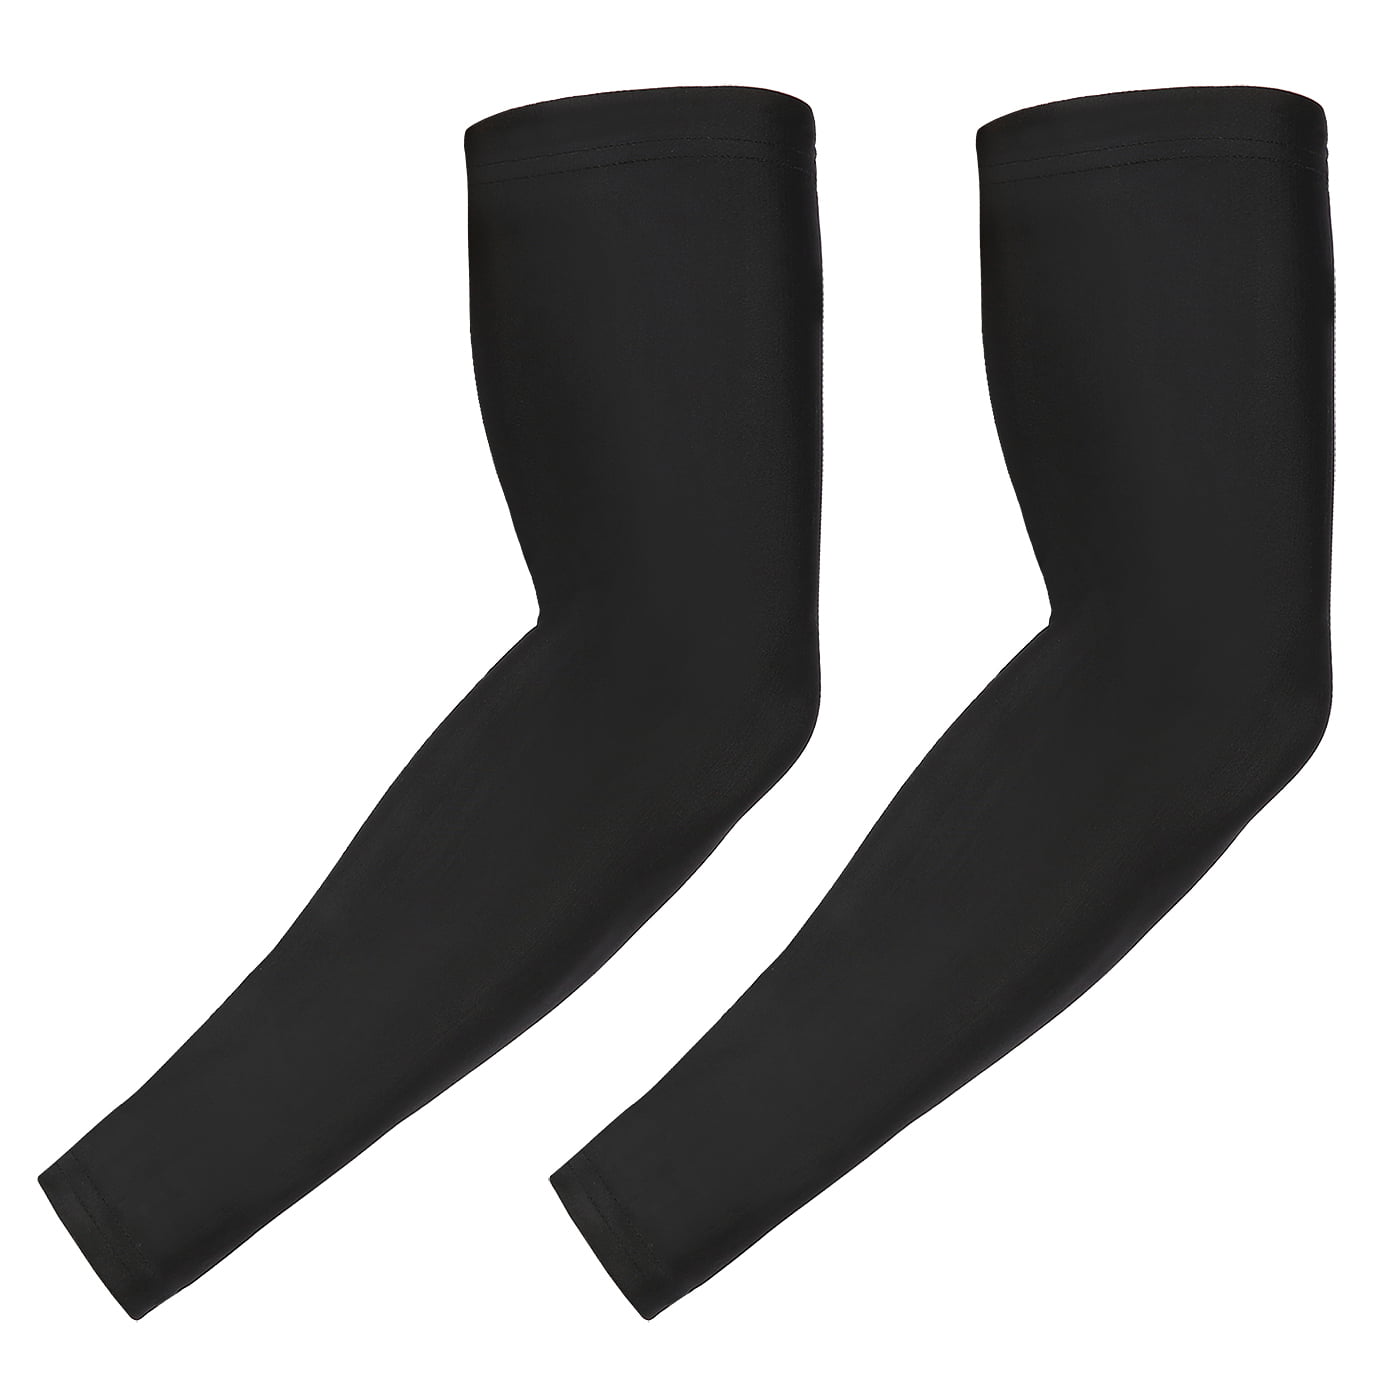  Tough Outdoors Sports Compression Arm Sleeves for Men & Women -  Youth, Kids Basketball Shooting Sleeves - Football, Baseball : Clothing